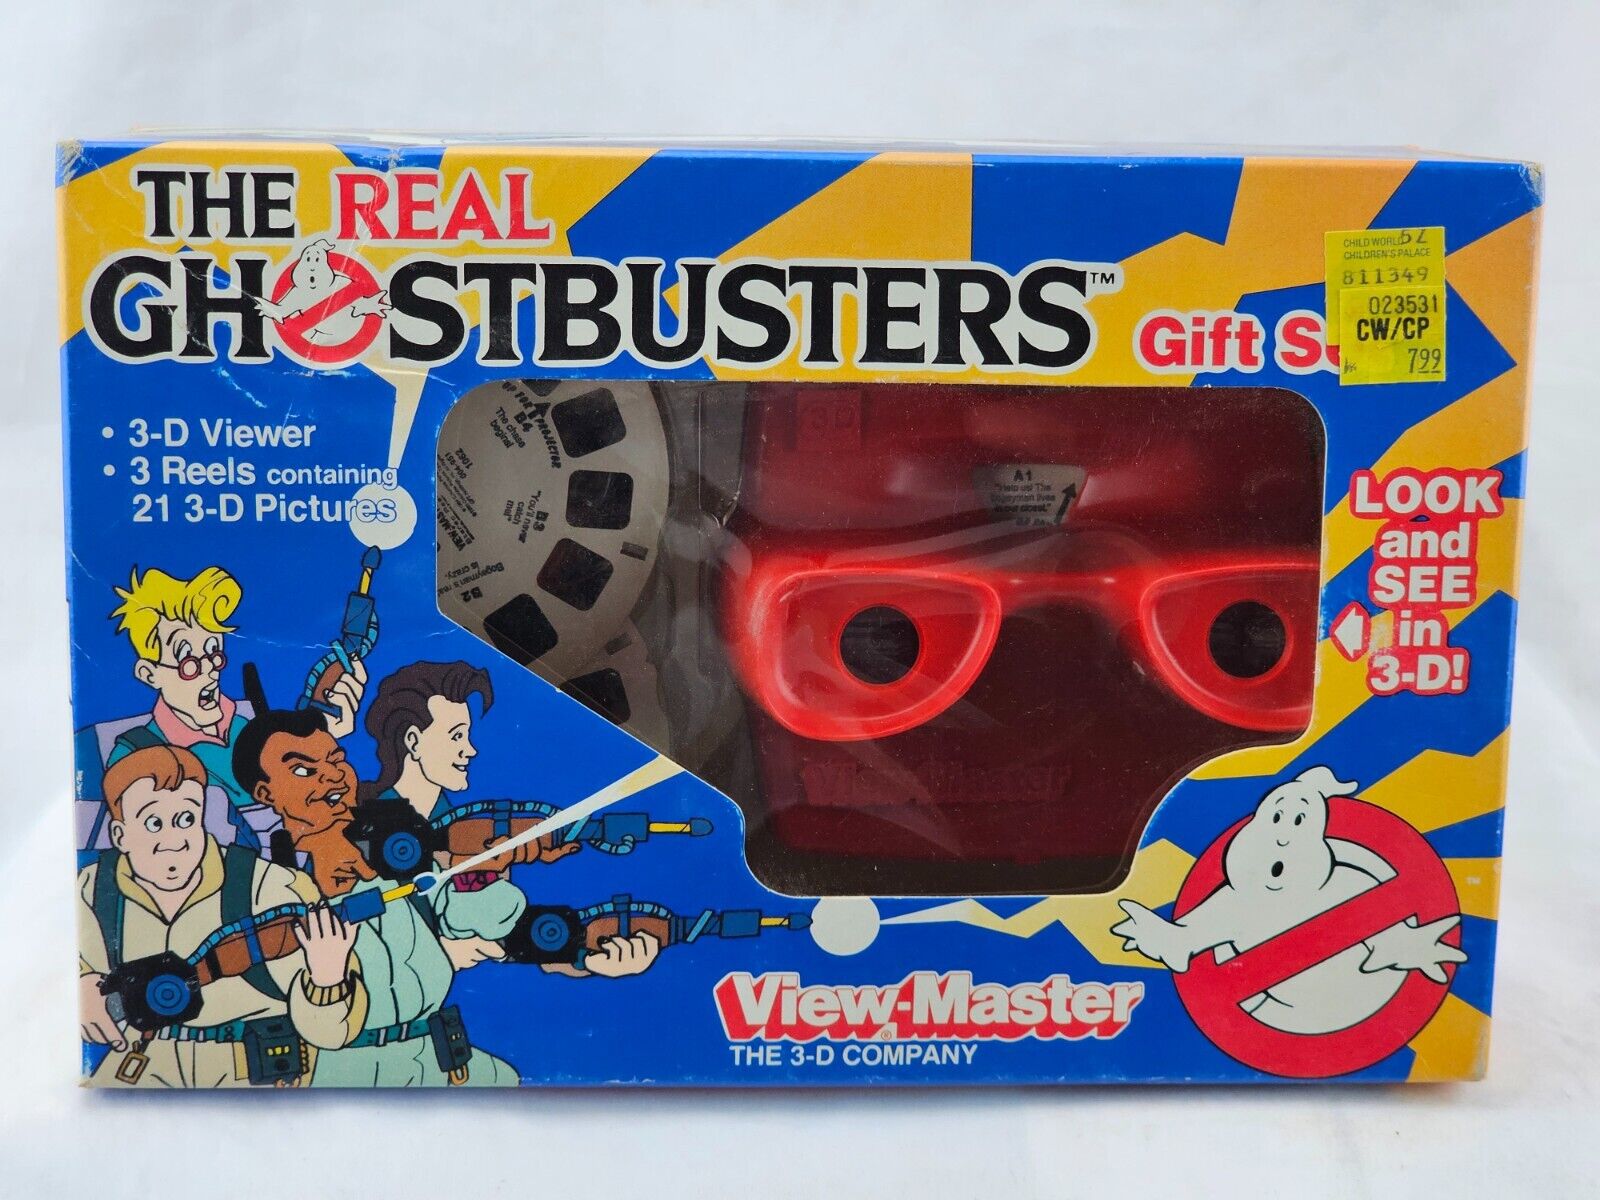 1987 The Real Ghostbusters 3D View-Master Gift Set Sealed 3 Reels and Viewer MIP